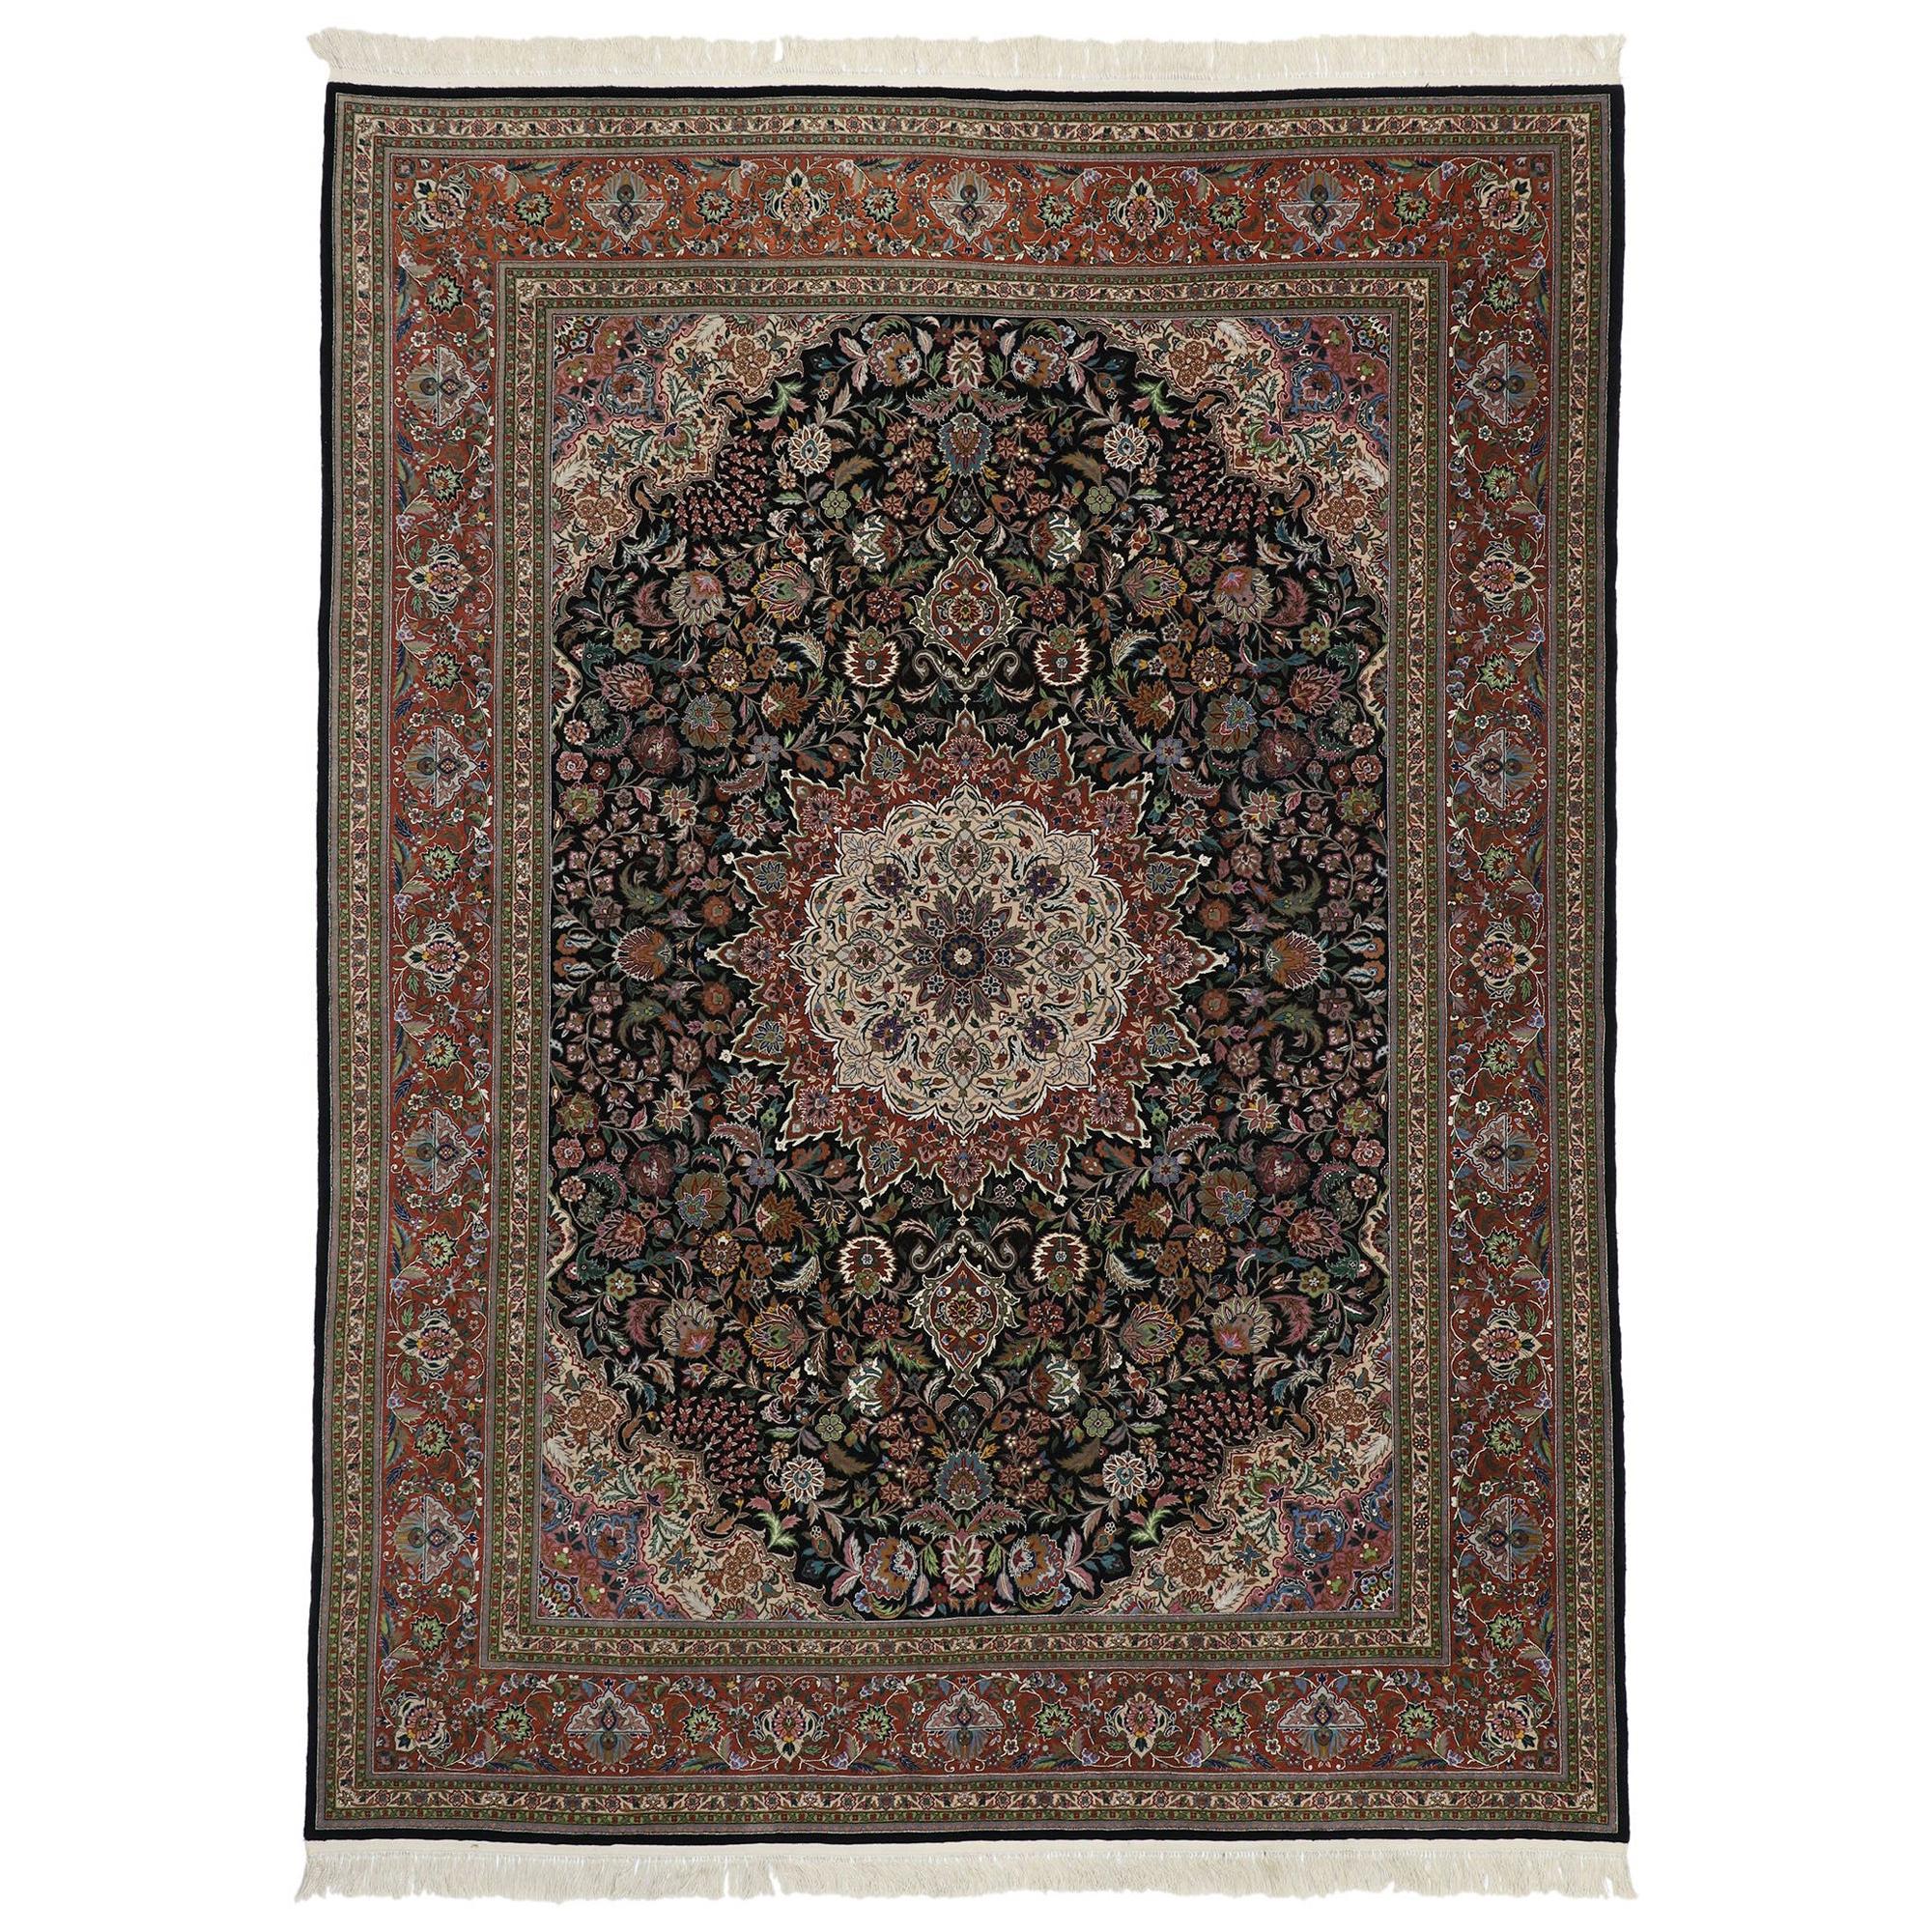 Vintage Chinese Persian Tabriz Design Rug with Victorian Baroque Style